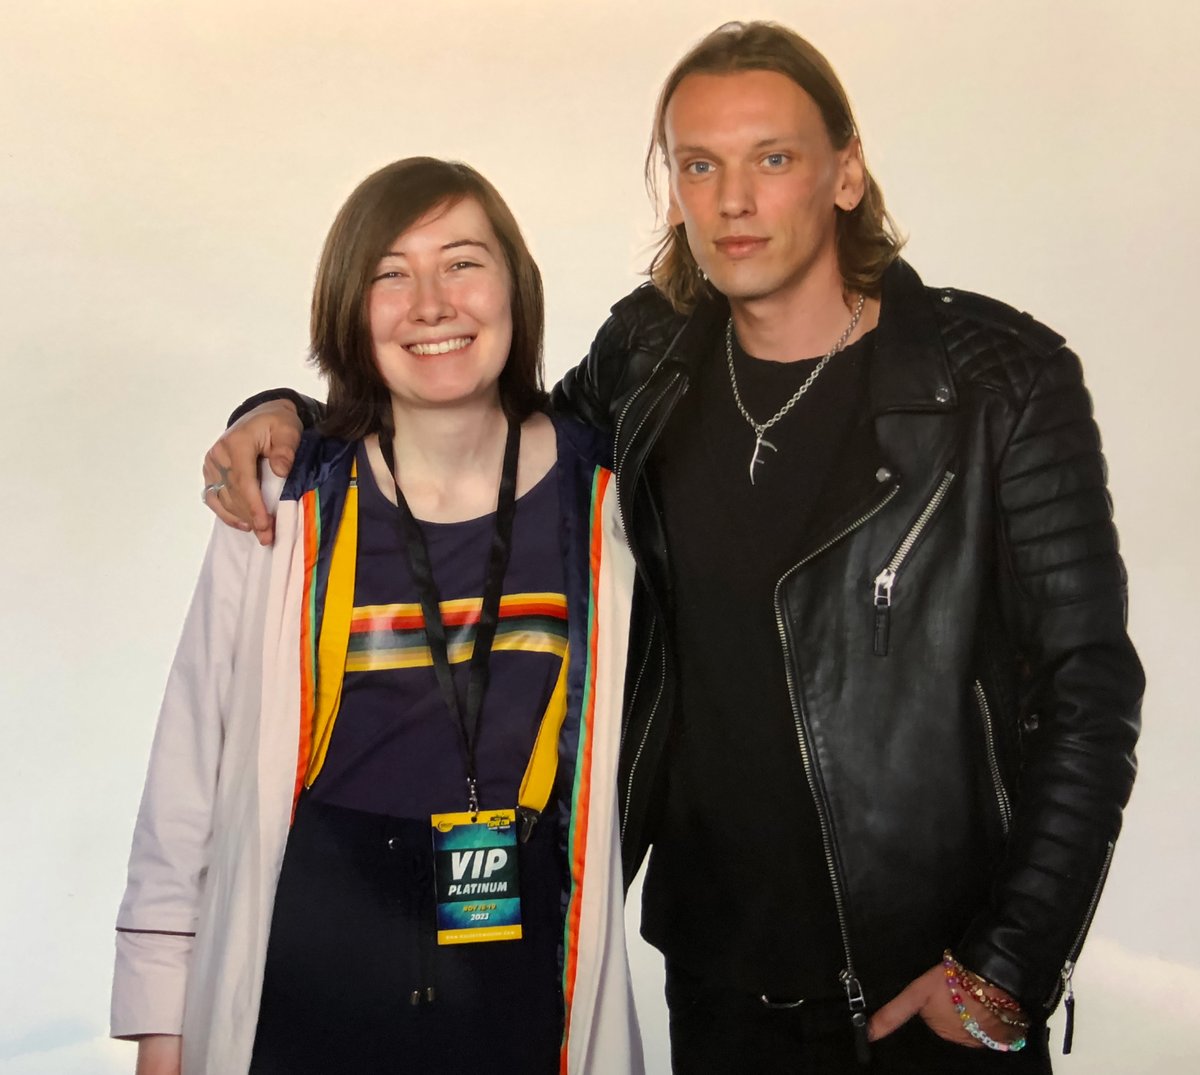 Photo with @Jamiebower from yesterday, saw I met him a year ago today too! Really appreciate the time he makes for his fans. Hope to see him again at @walescomiccon after the many posts I have seen from those who met him wanting to meet him again because of how kind he was 😊